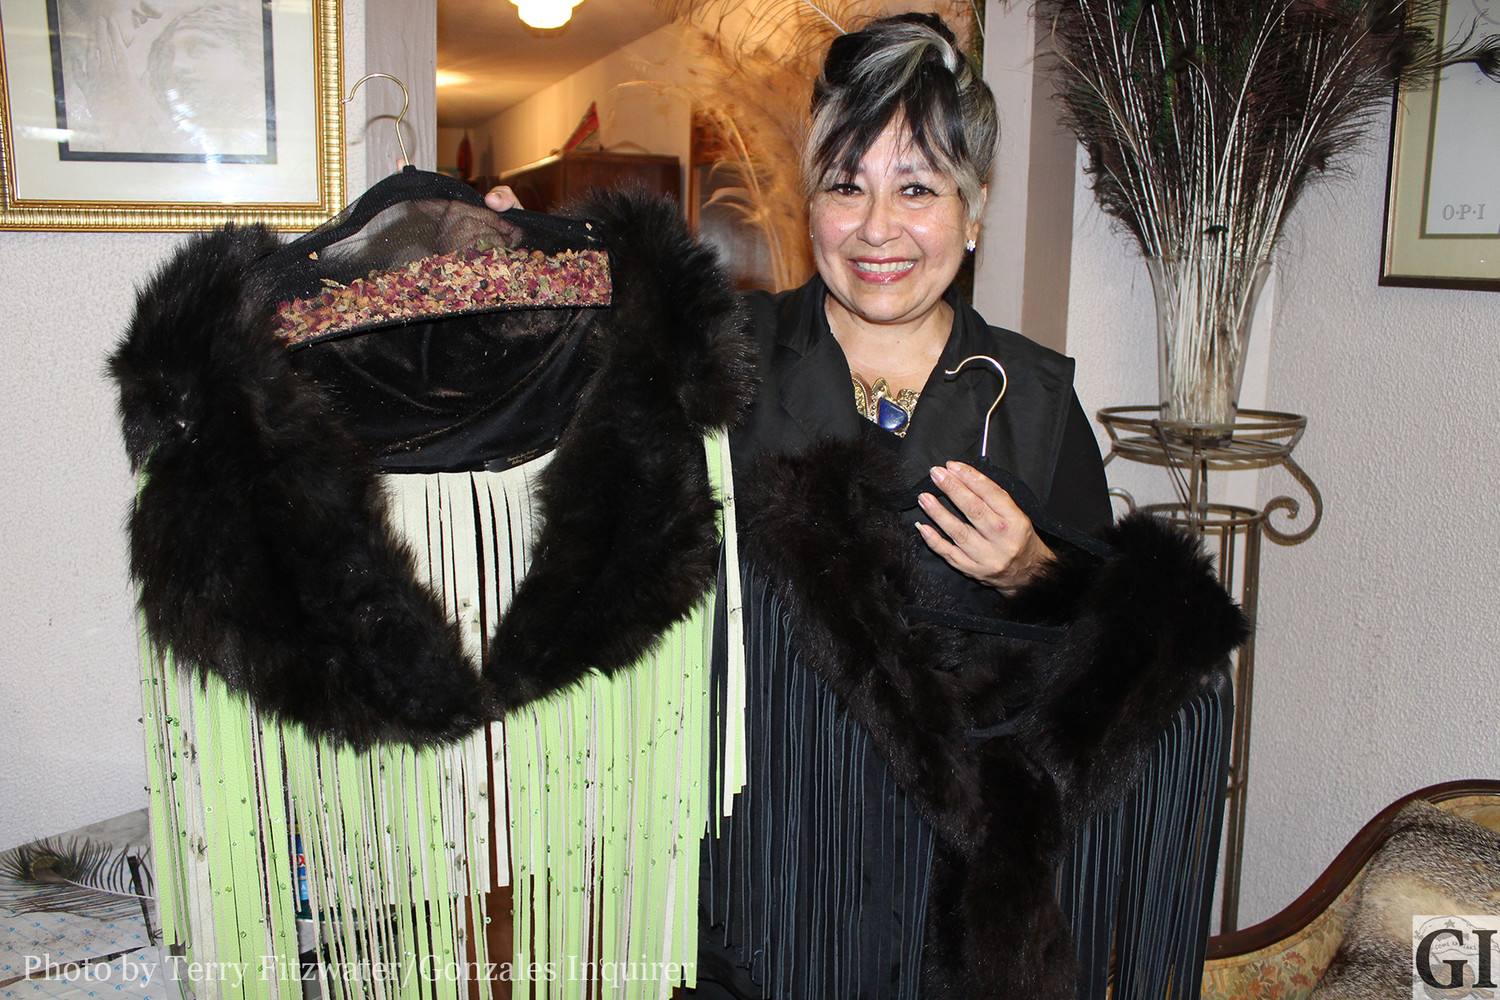 Susie Rodriguez’s latest business endeavor involves “reFURposing” old fur for new uses, as the Luling entrepreneur explains. “I don’t know how else you would phrase what I am doing. I am literally taking old furs that have been tossed out, thrown aside or have been hanging in closets or stored away in boxes and bringing them back to life in a variety of new forms.